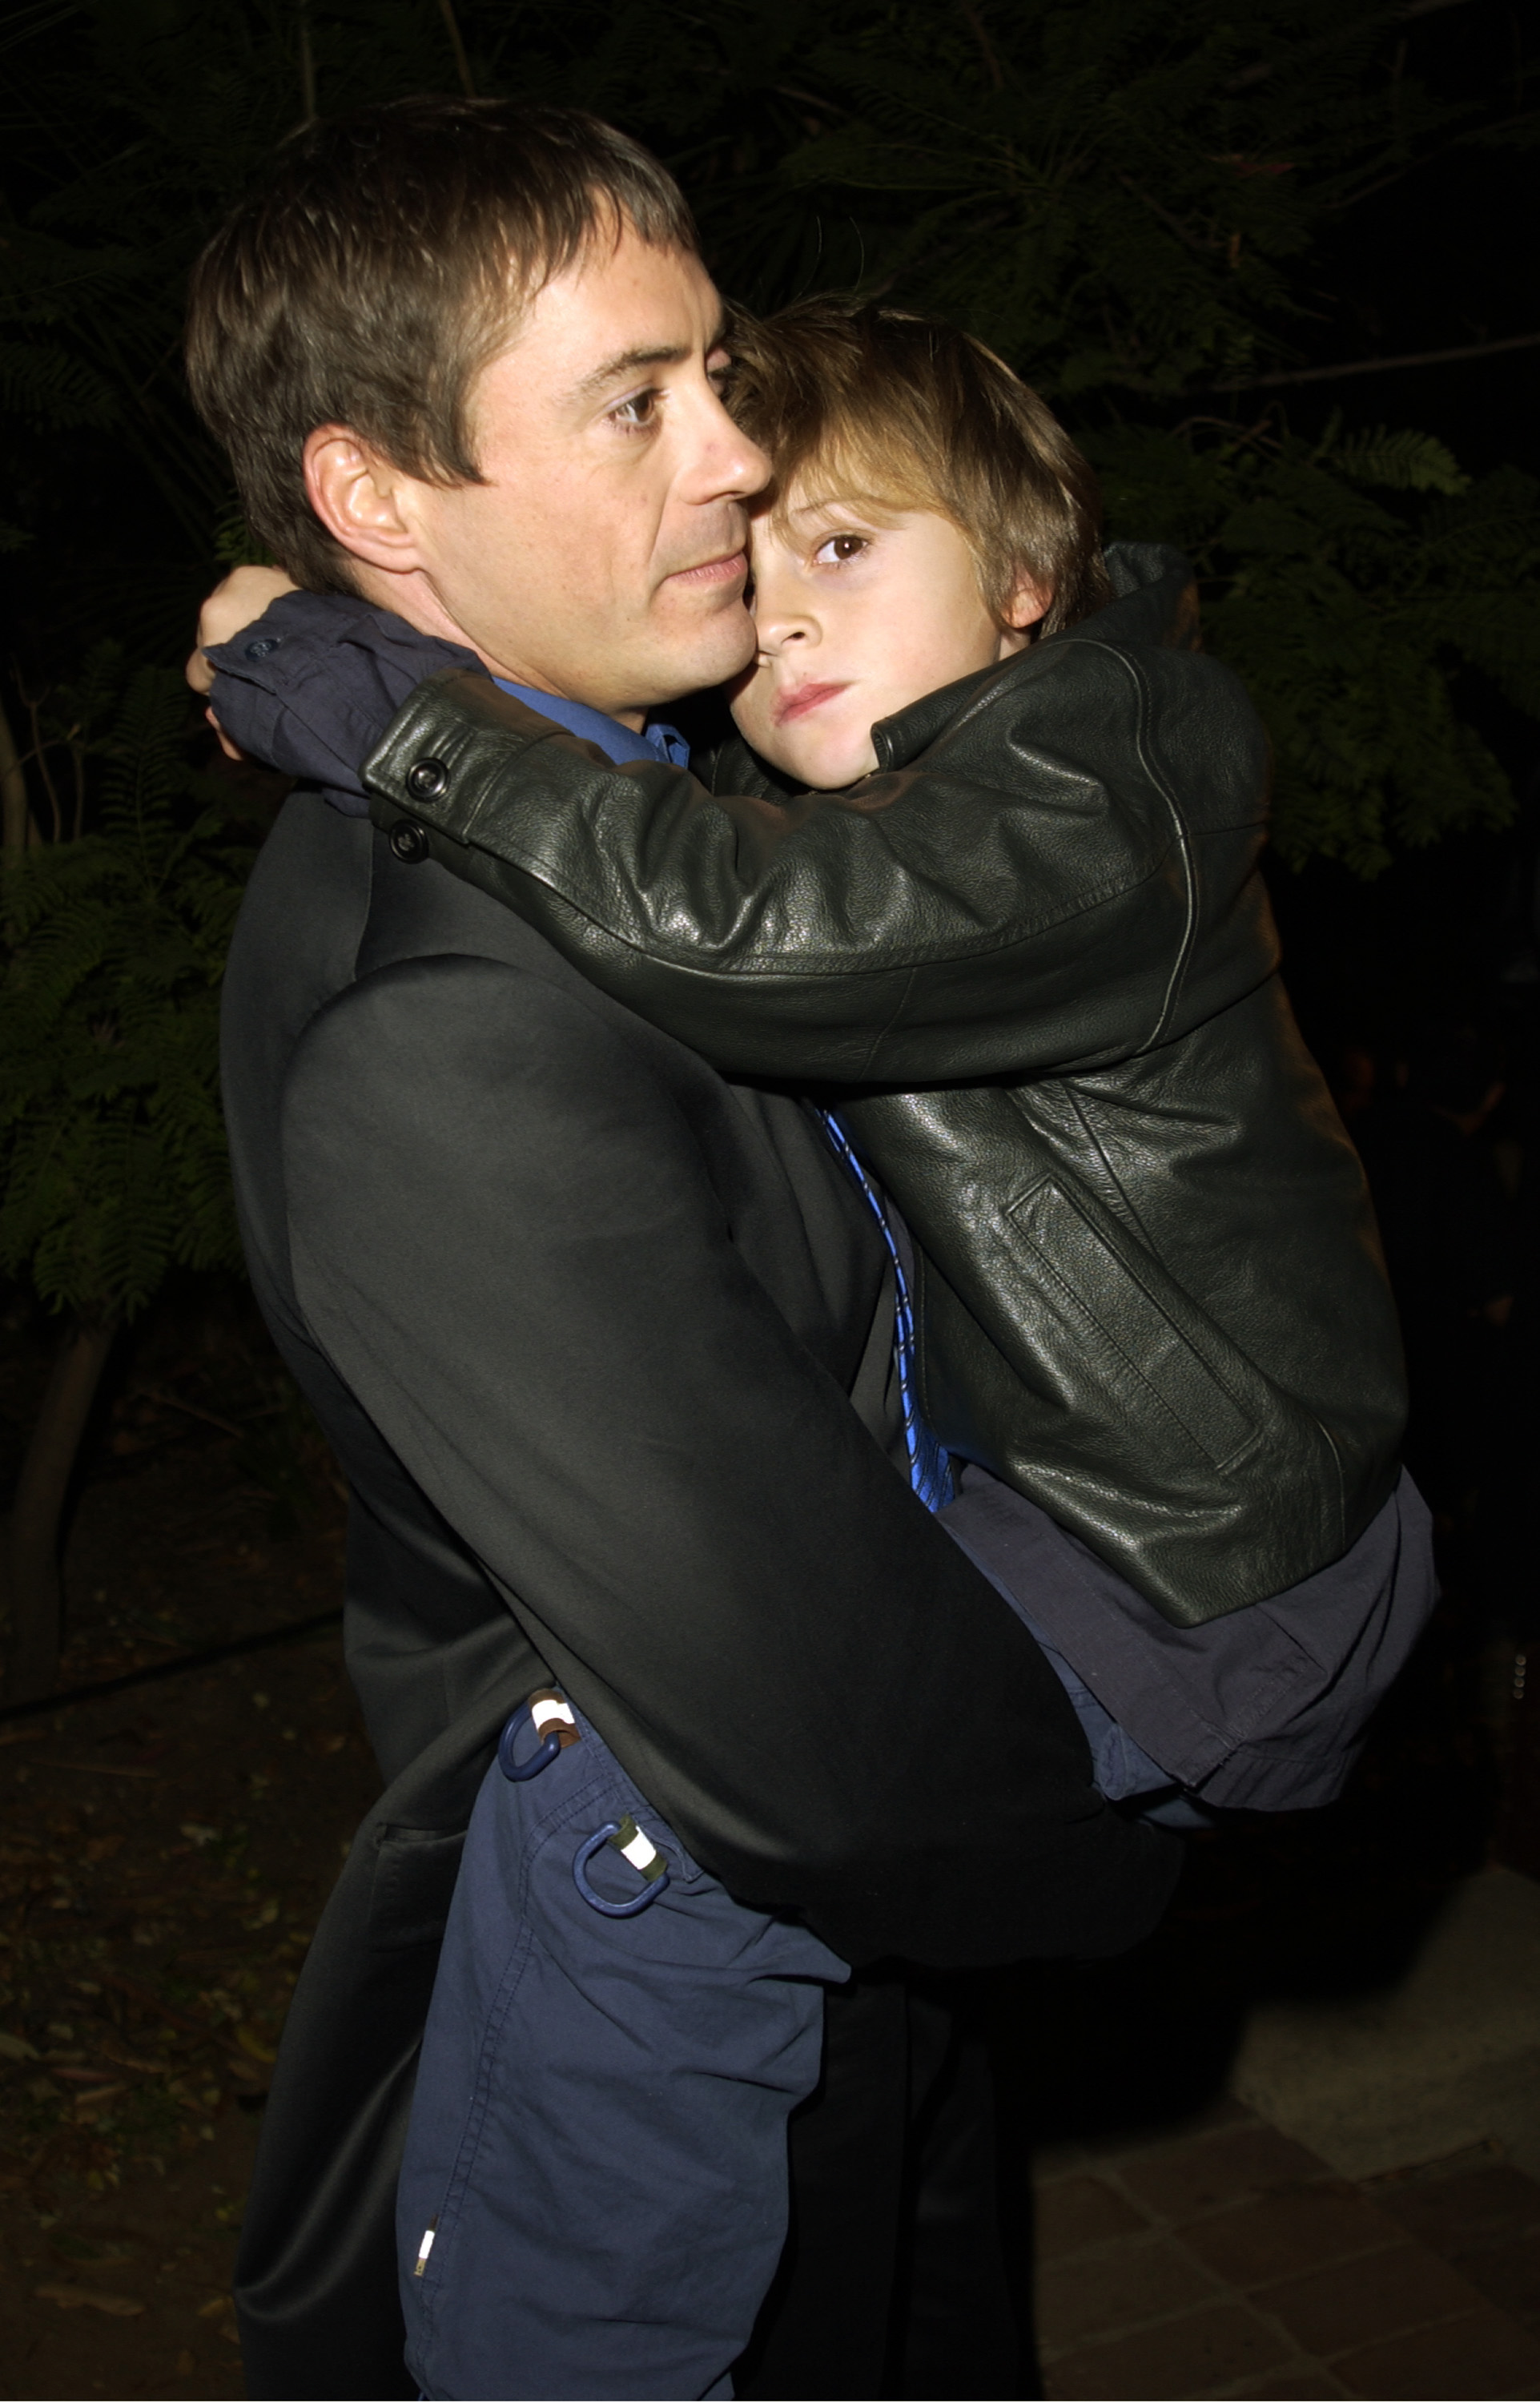 Robert Downey Jr and his son Indio Falconer-Downey in Hollywood in 2001 | Source: Getty Images